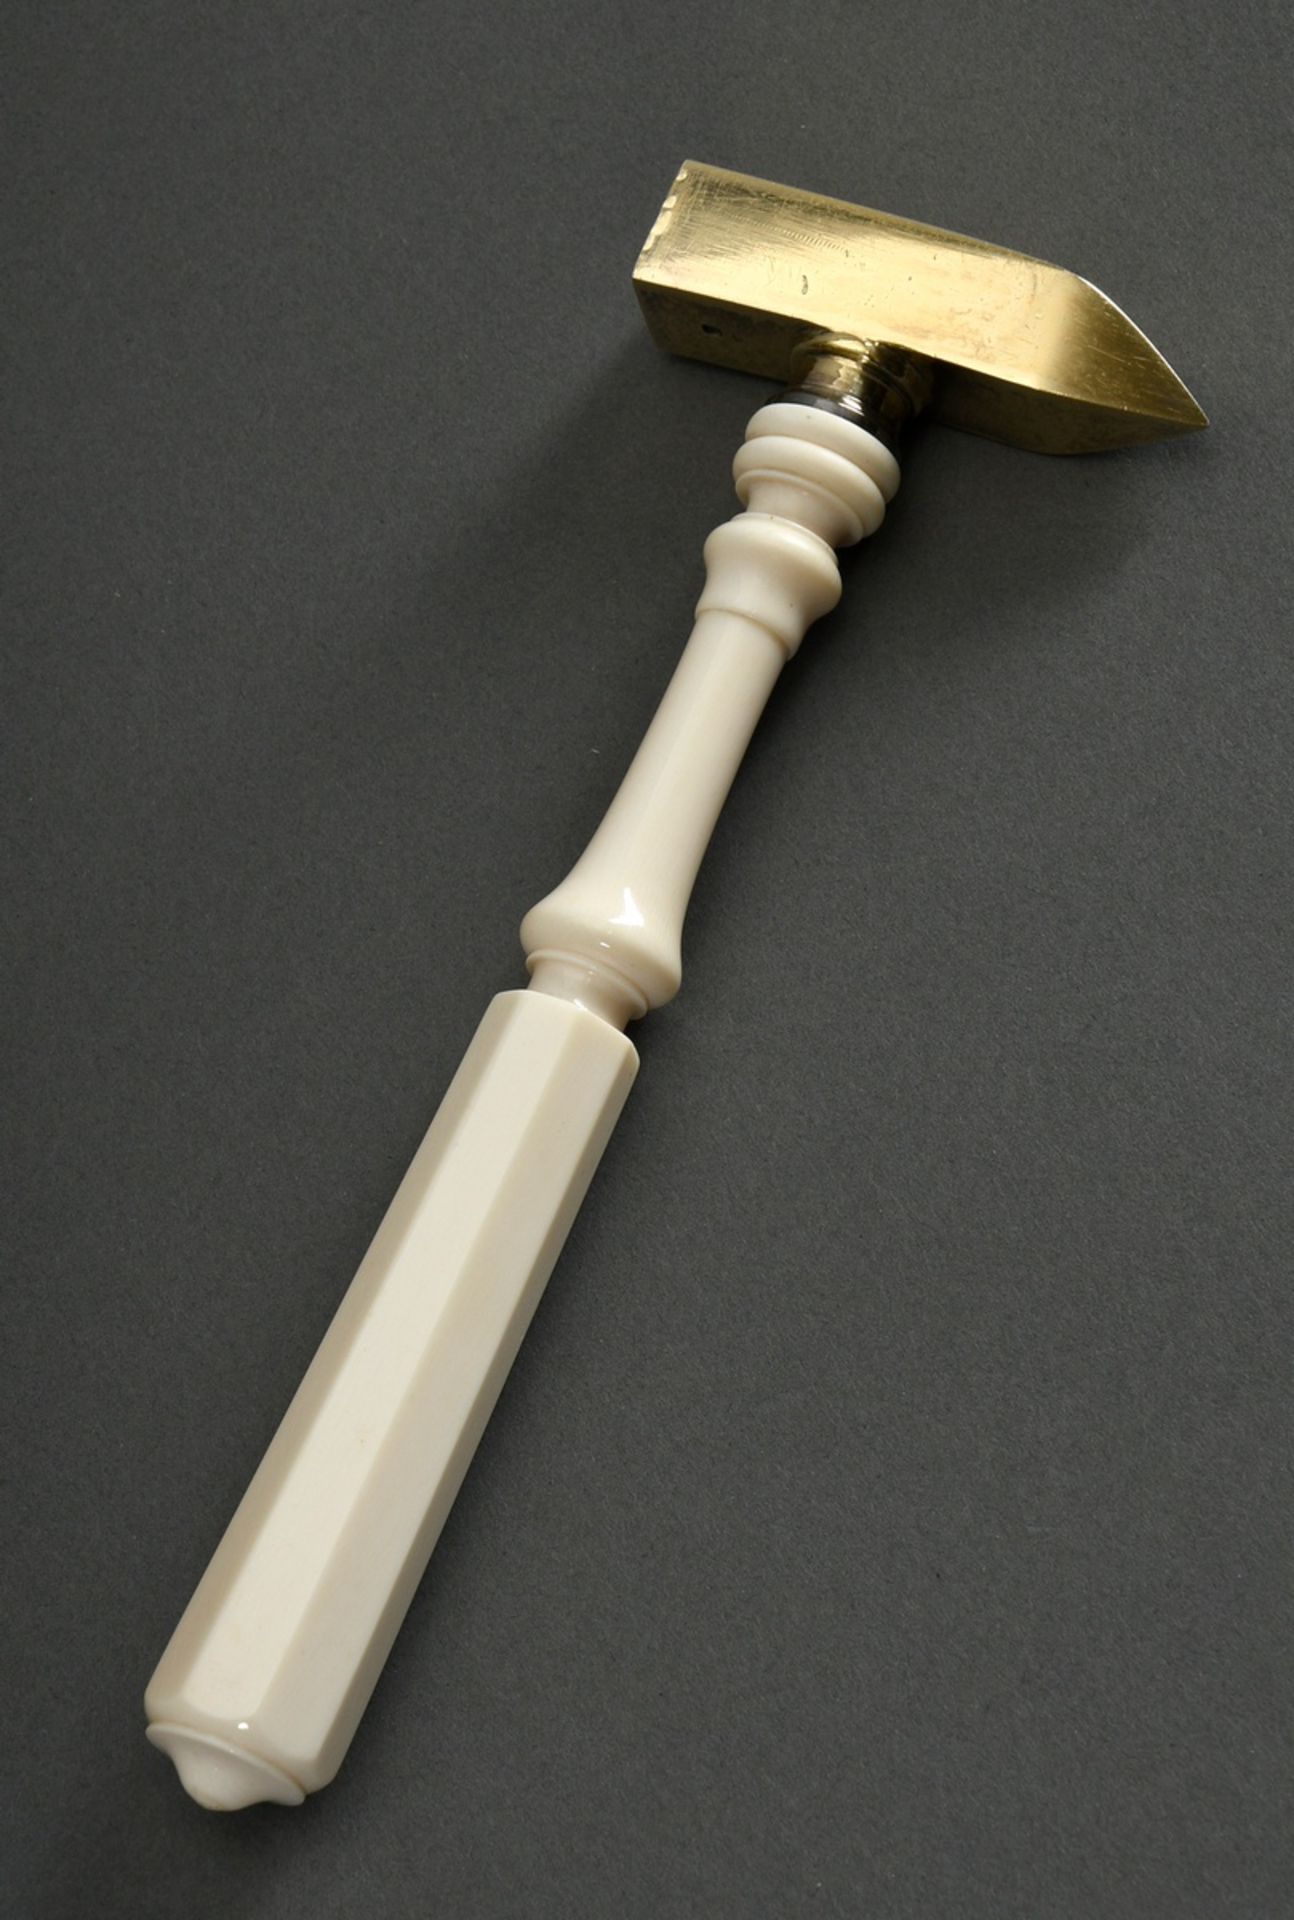 Masonic hammer with turned ivory handle and gilded vermeille silver top, MZ: "EP" (probably Emile P